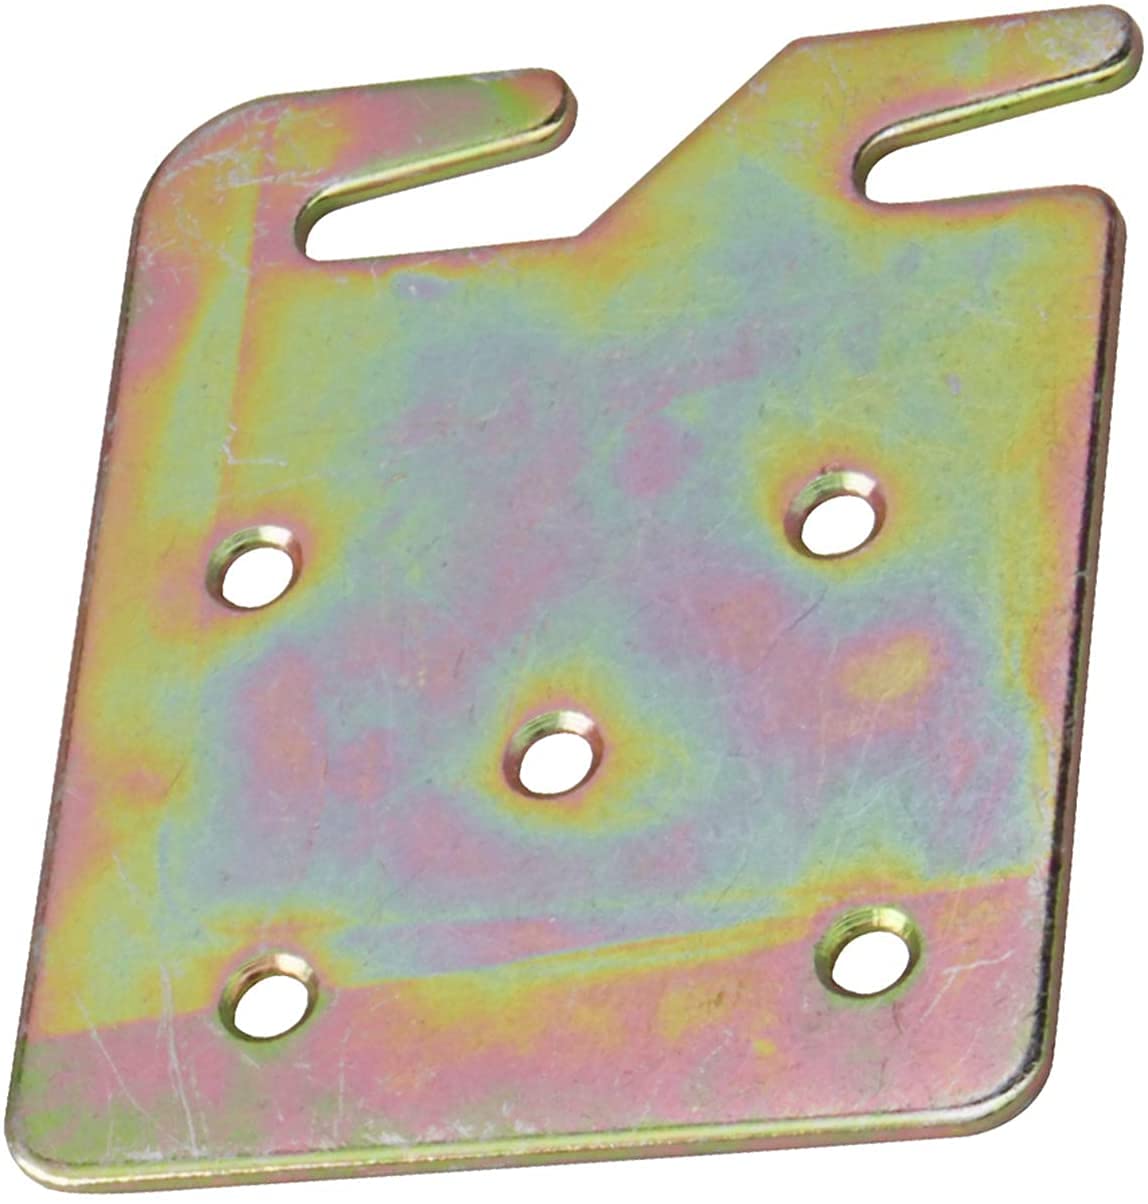 First Choice Products Heavy 5 Hole Wood Frame Bed Hook Plates – Pack of 4 Brackets, Gold